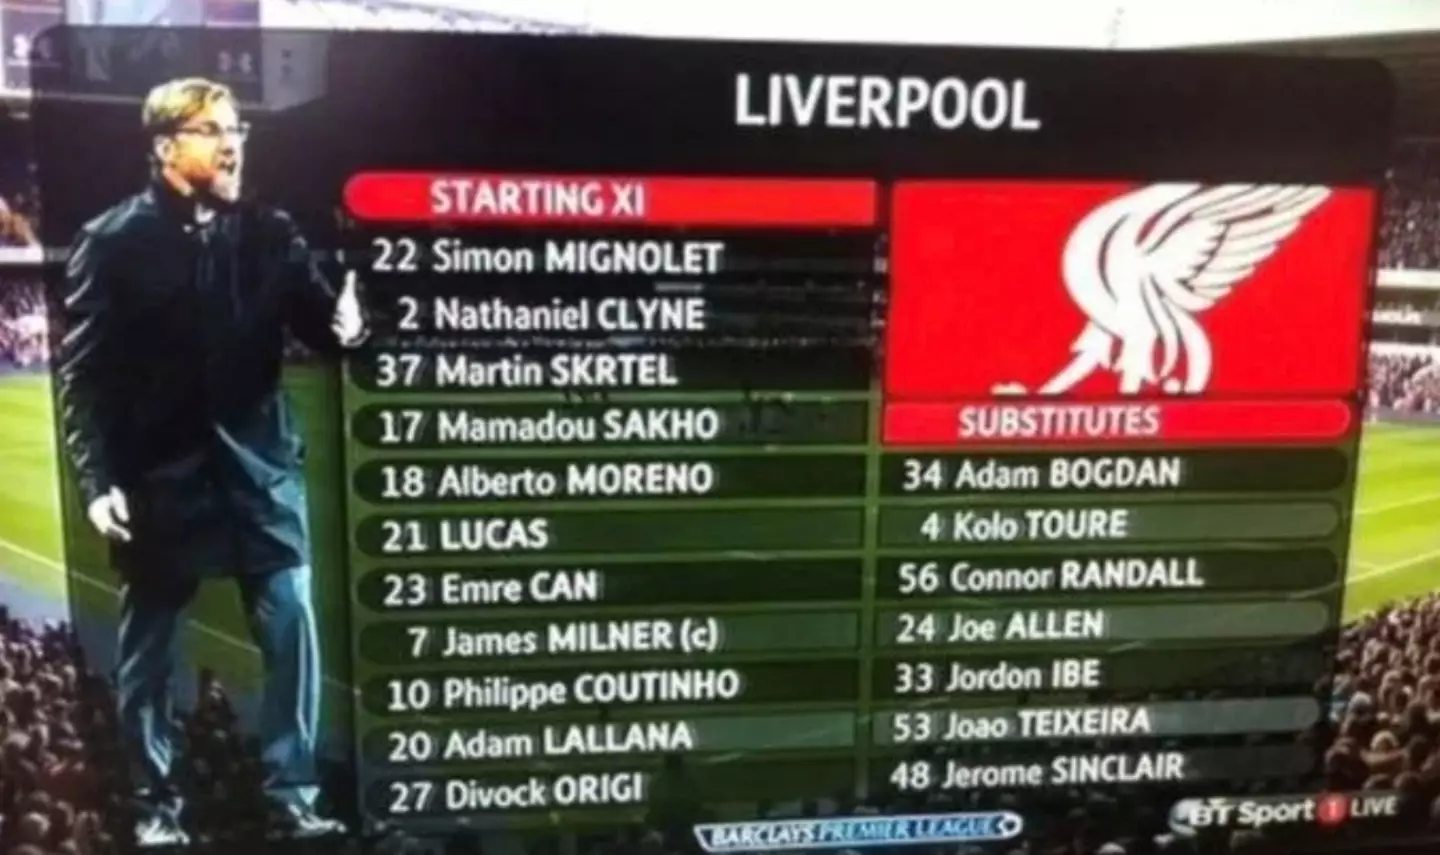 Klopp's starting XI in his first match as Liverpool manager (Image: BT Sport)